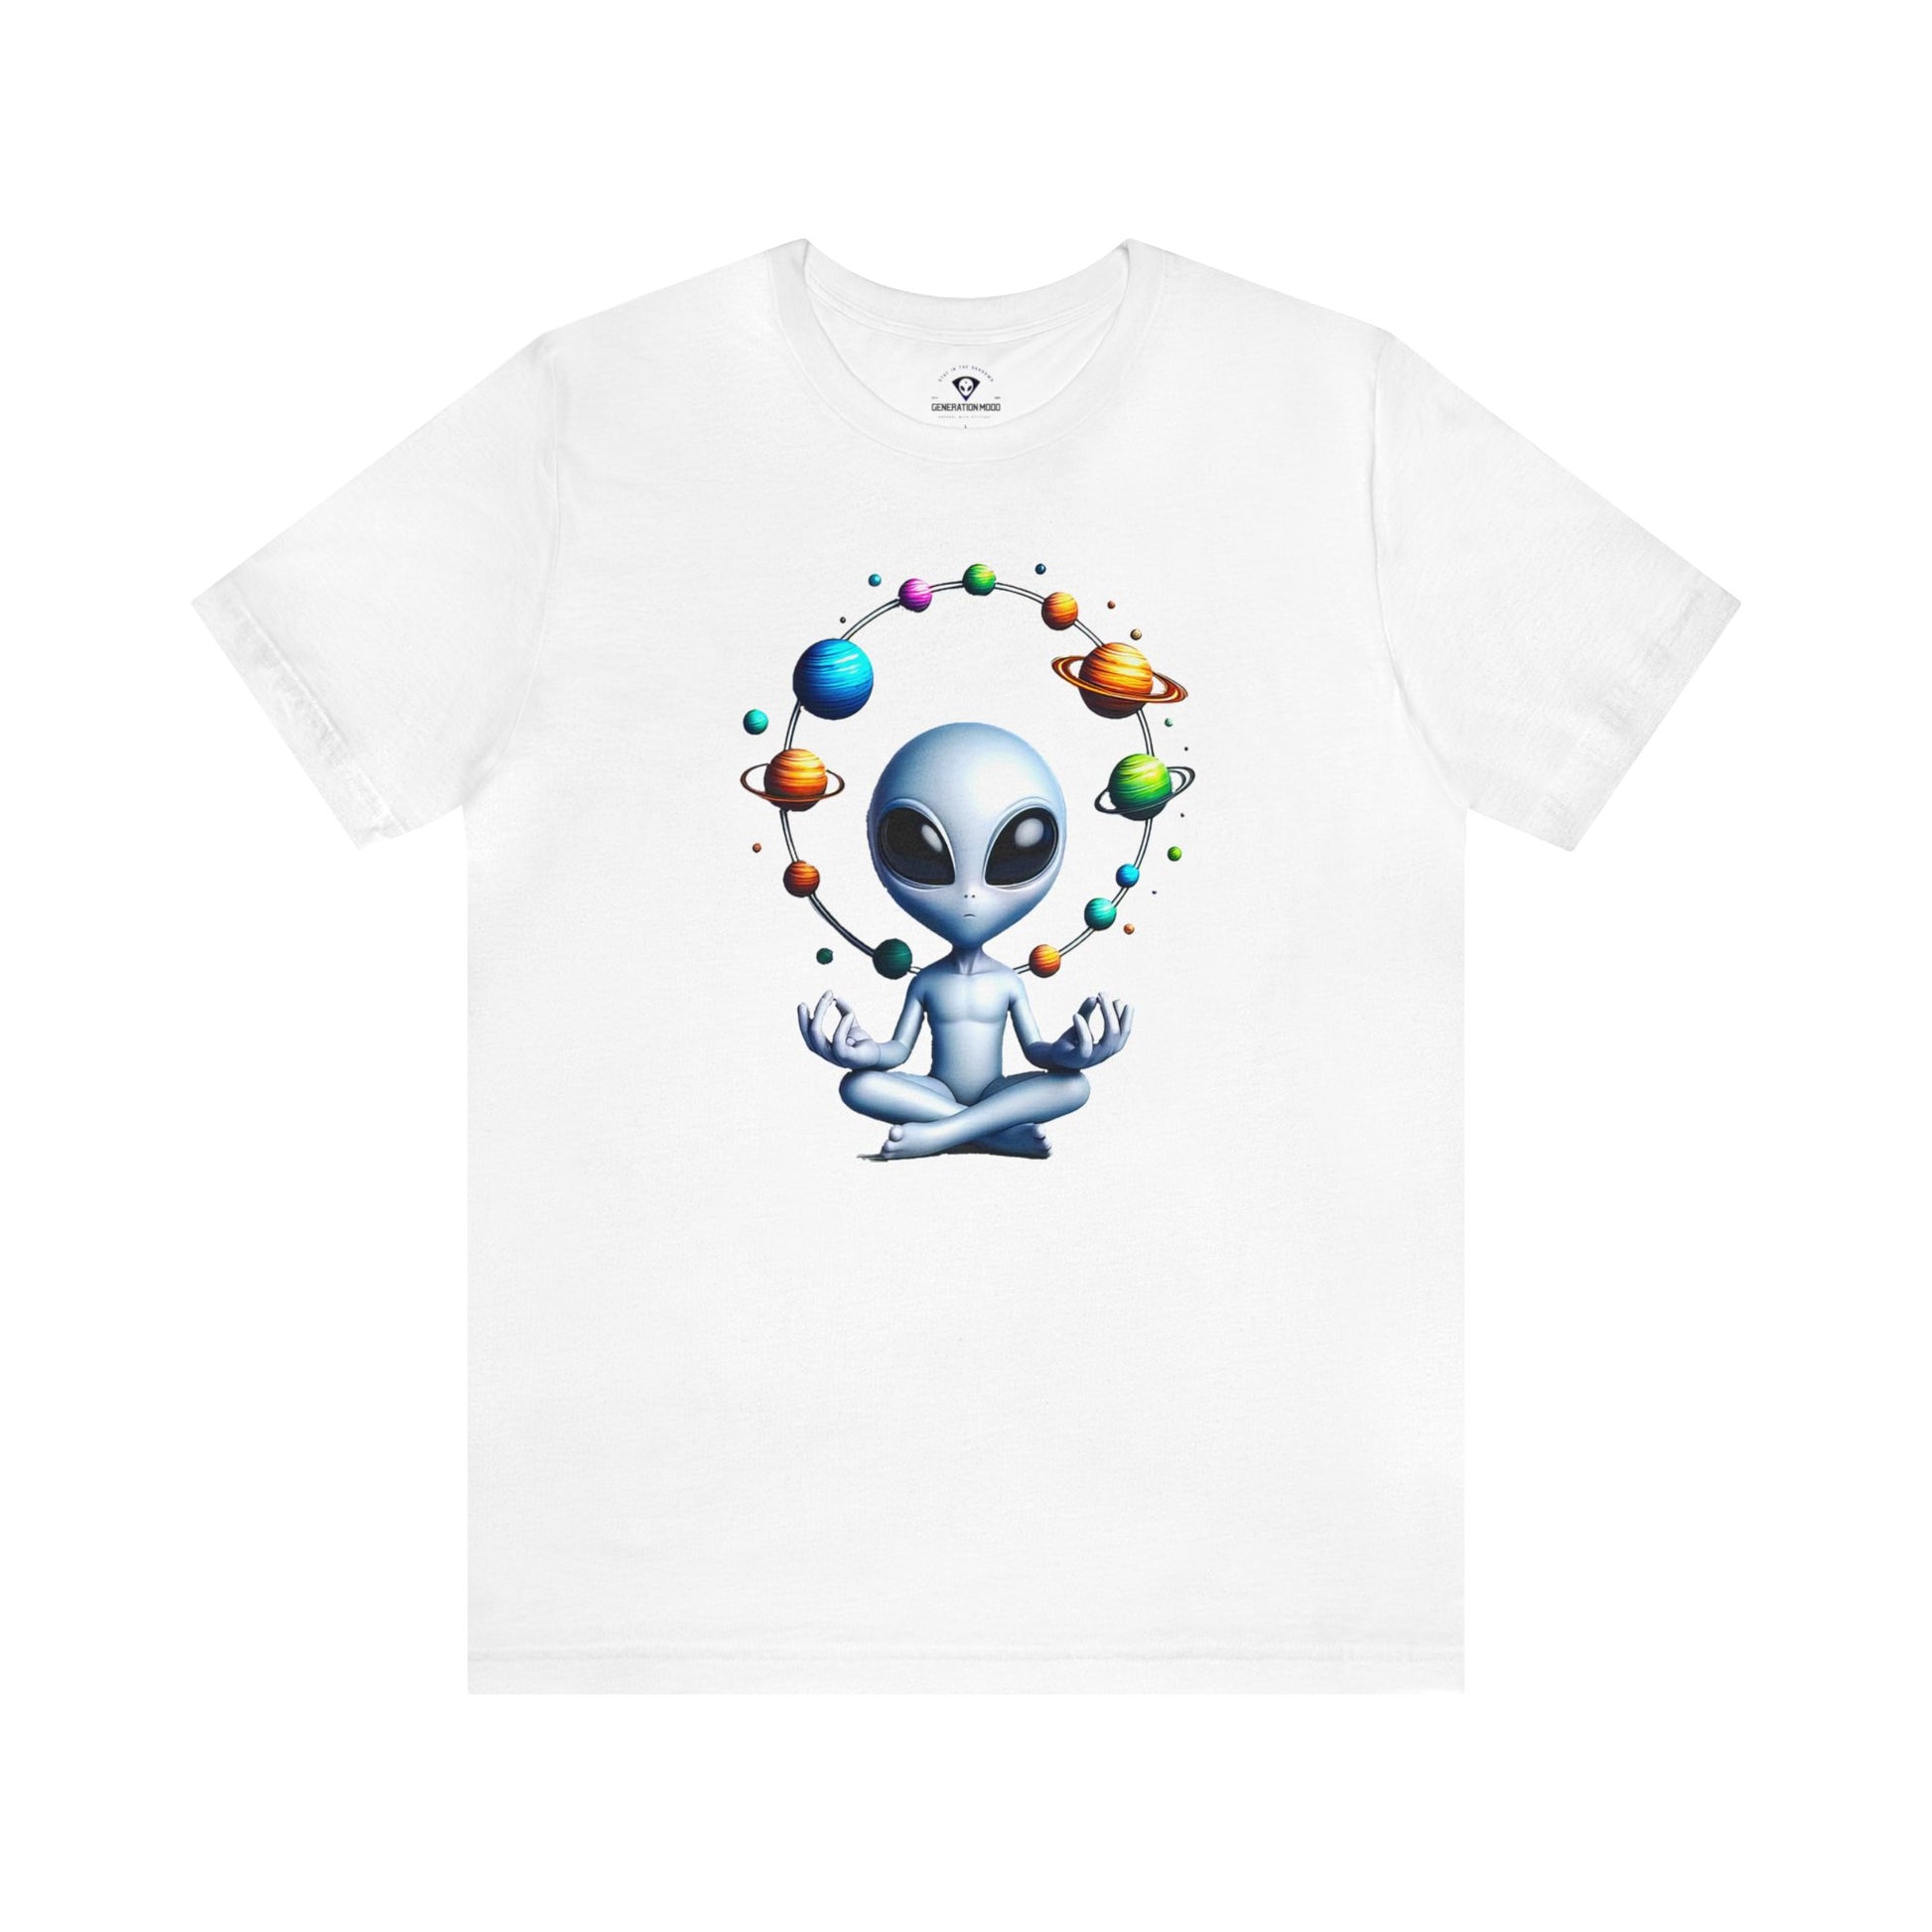 Generation Mood's Meditation in the Cosmos: Alien Sweatshirt , Find Your Zen Among the Planets Tshirt in white.